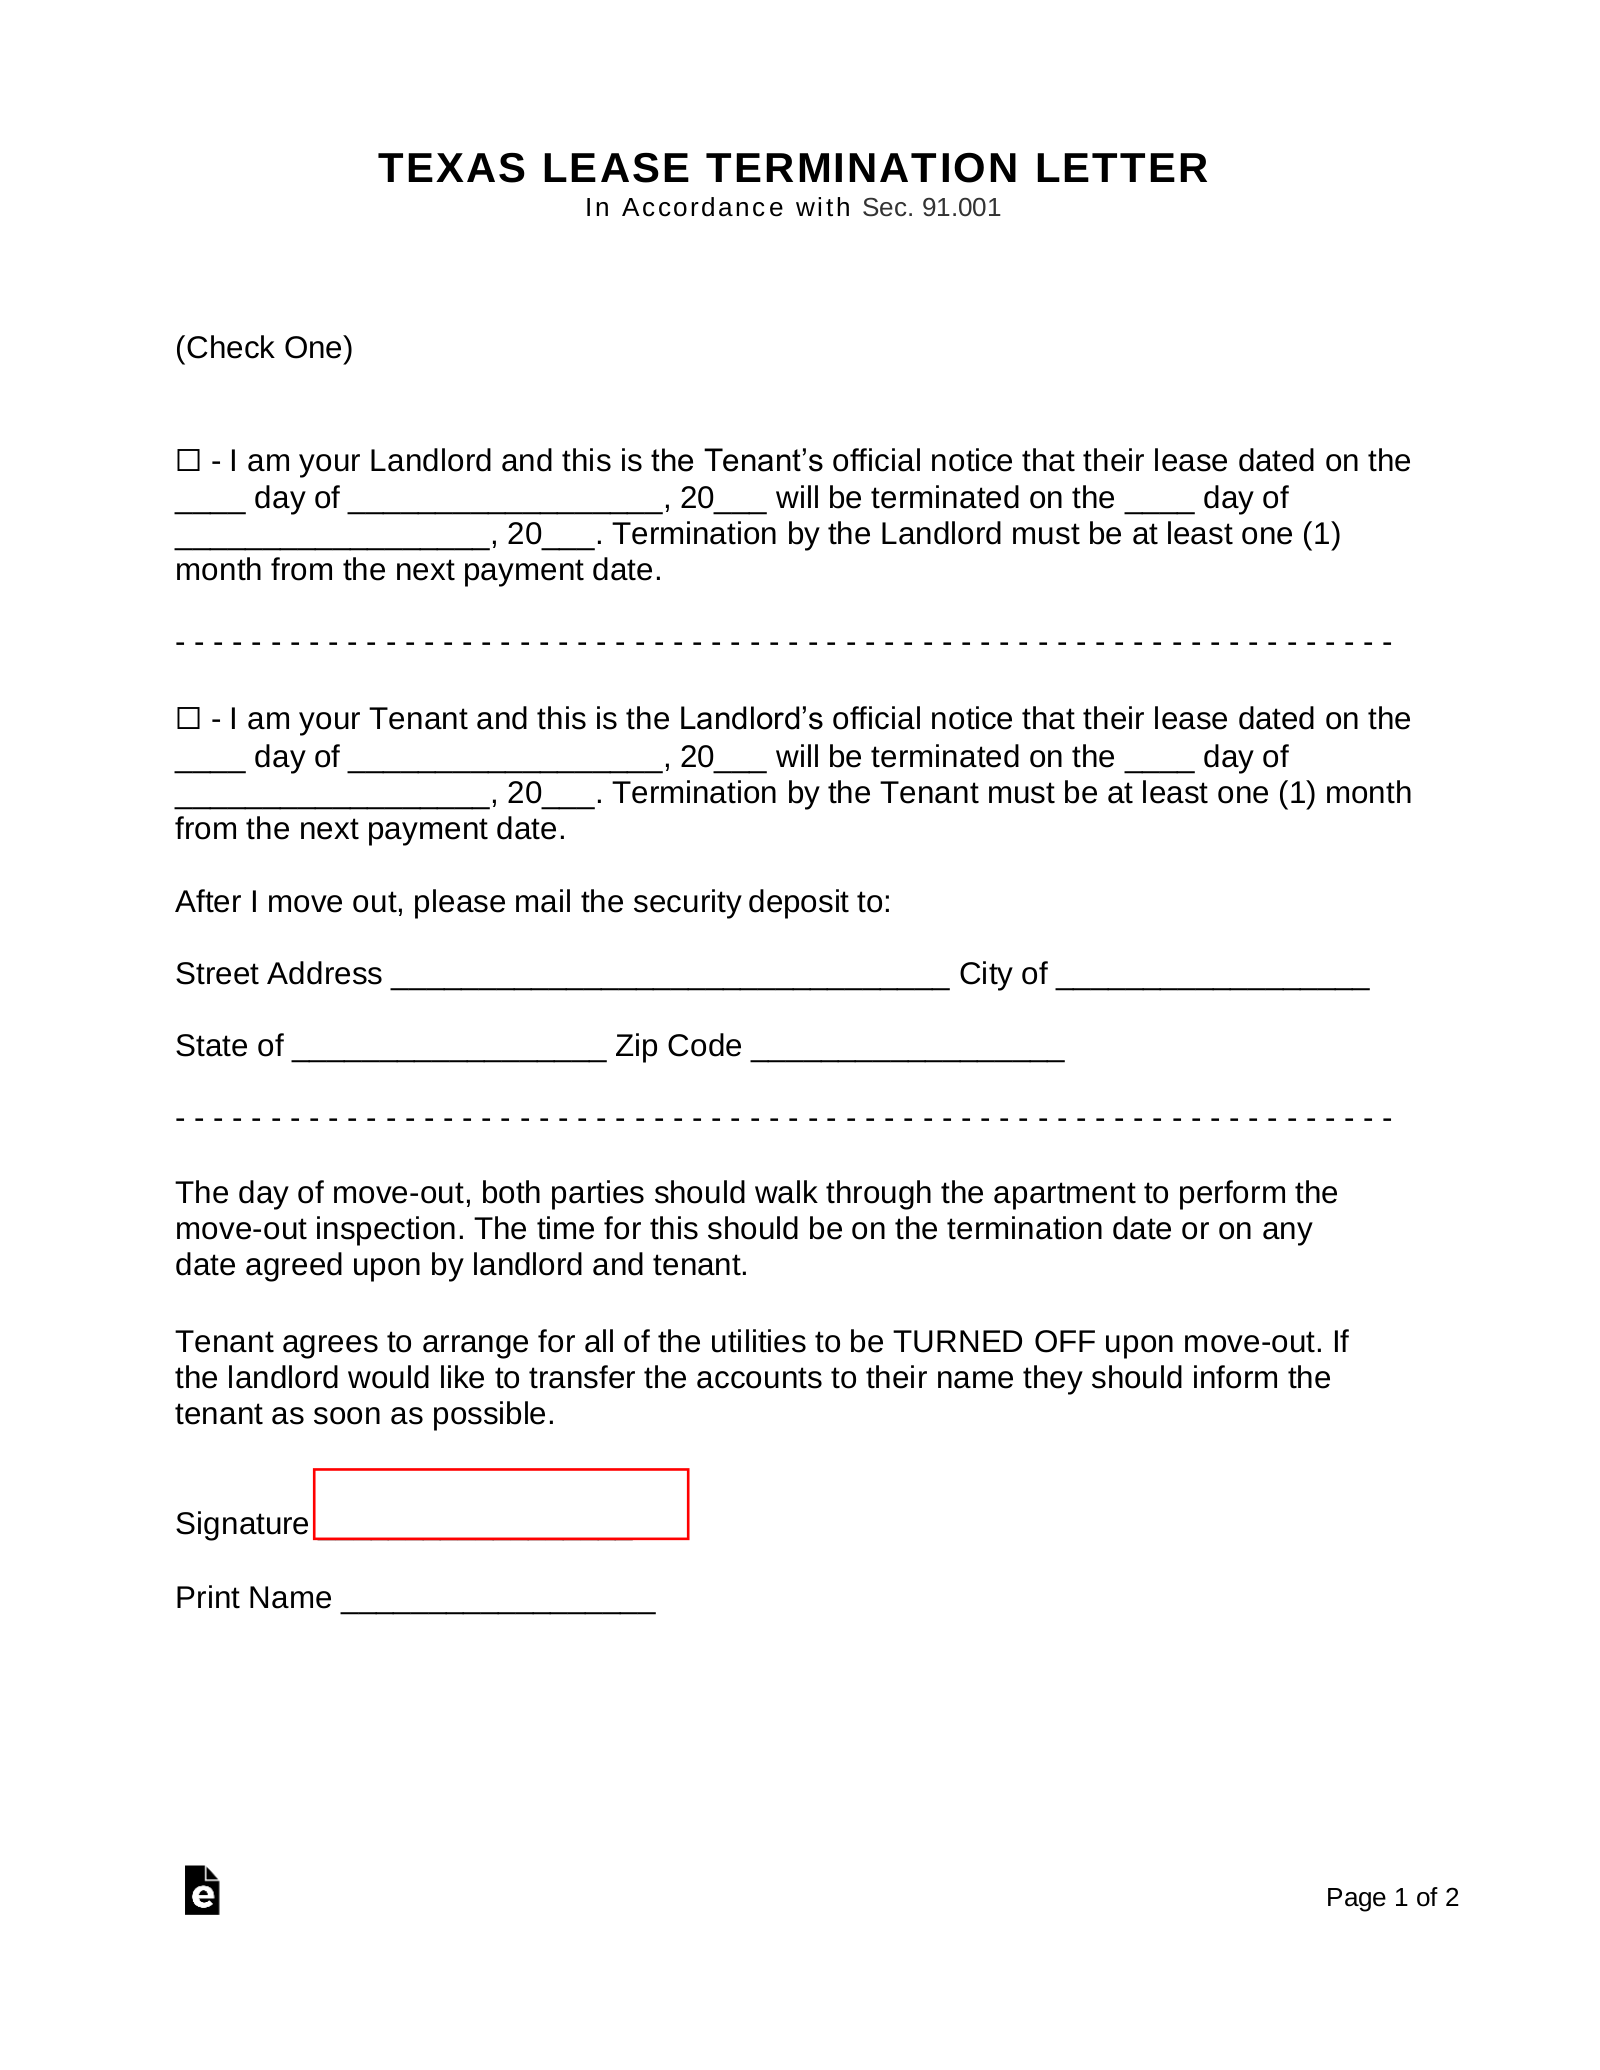 Sample Letter From Landlord To Tenant Notice To Vacate from eforms.com